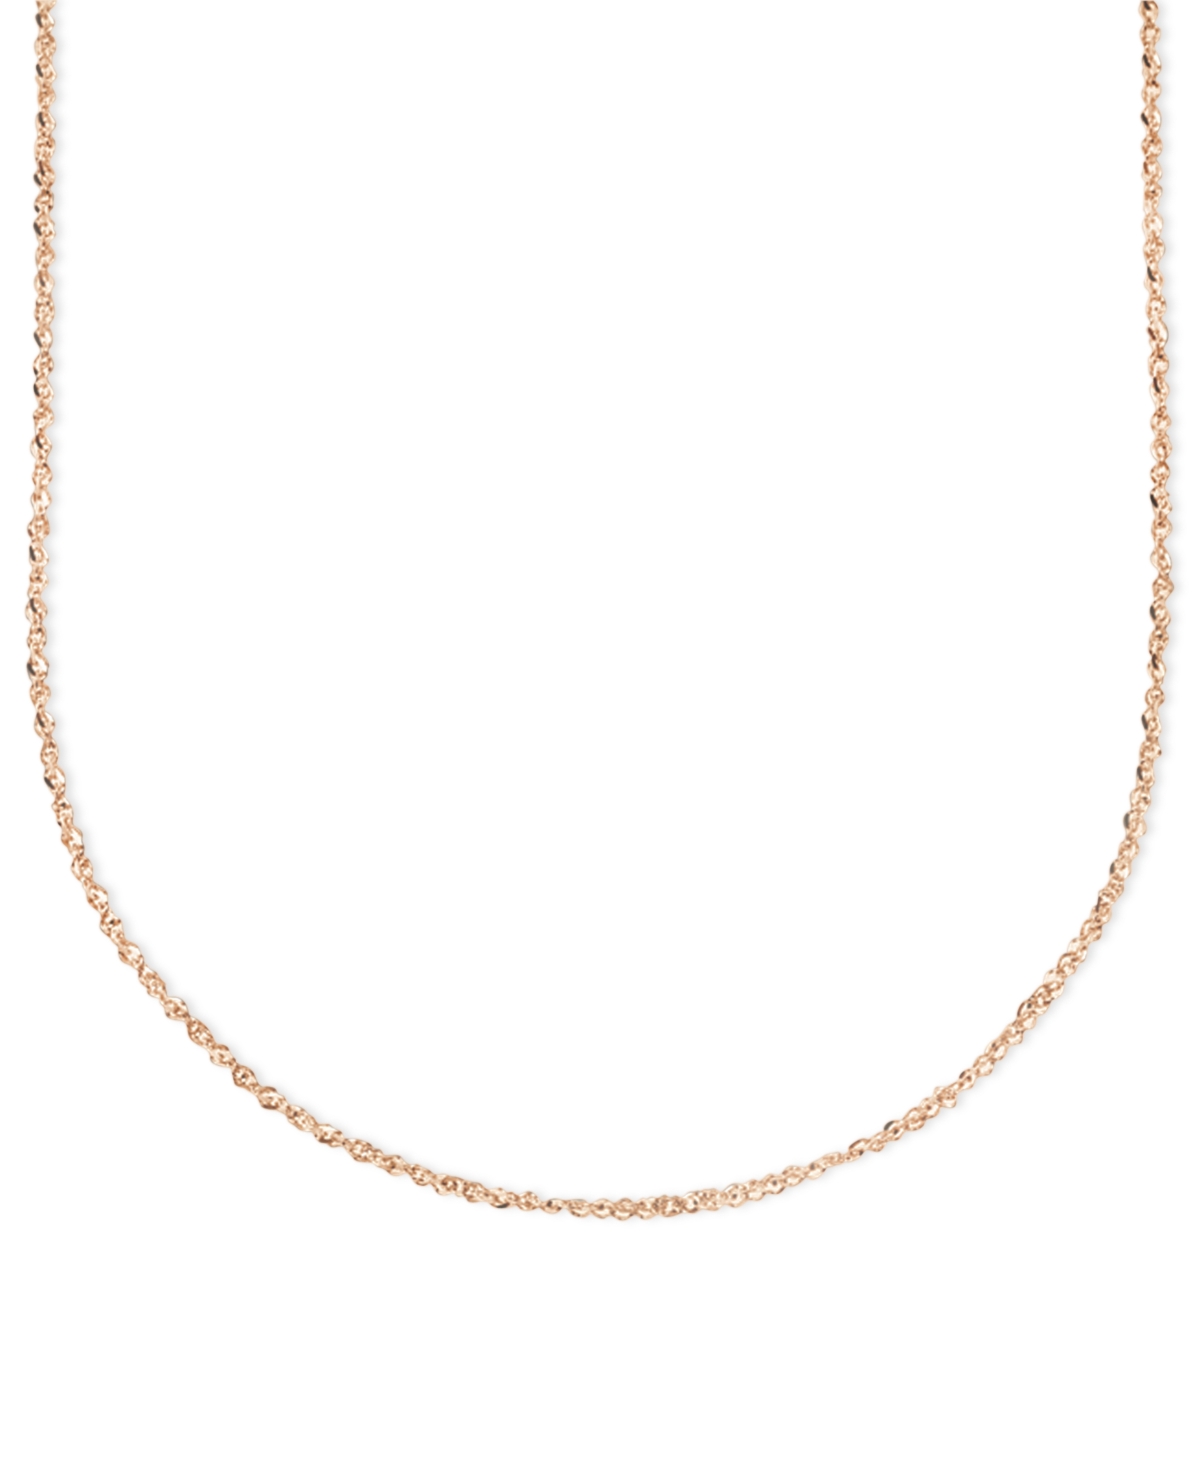 14k Rose Gold Necklace, 16" Perfectina Chain (1-1/8mm) - Rose Gold